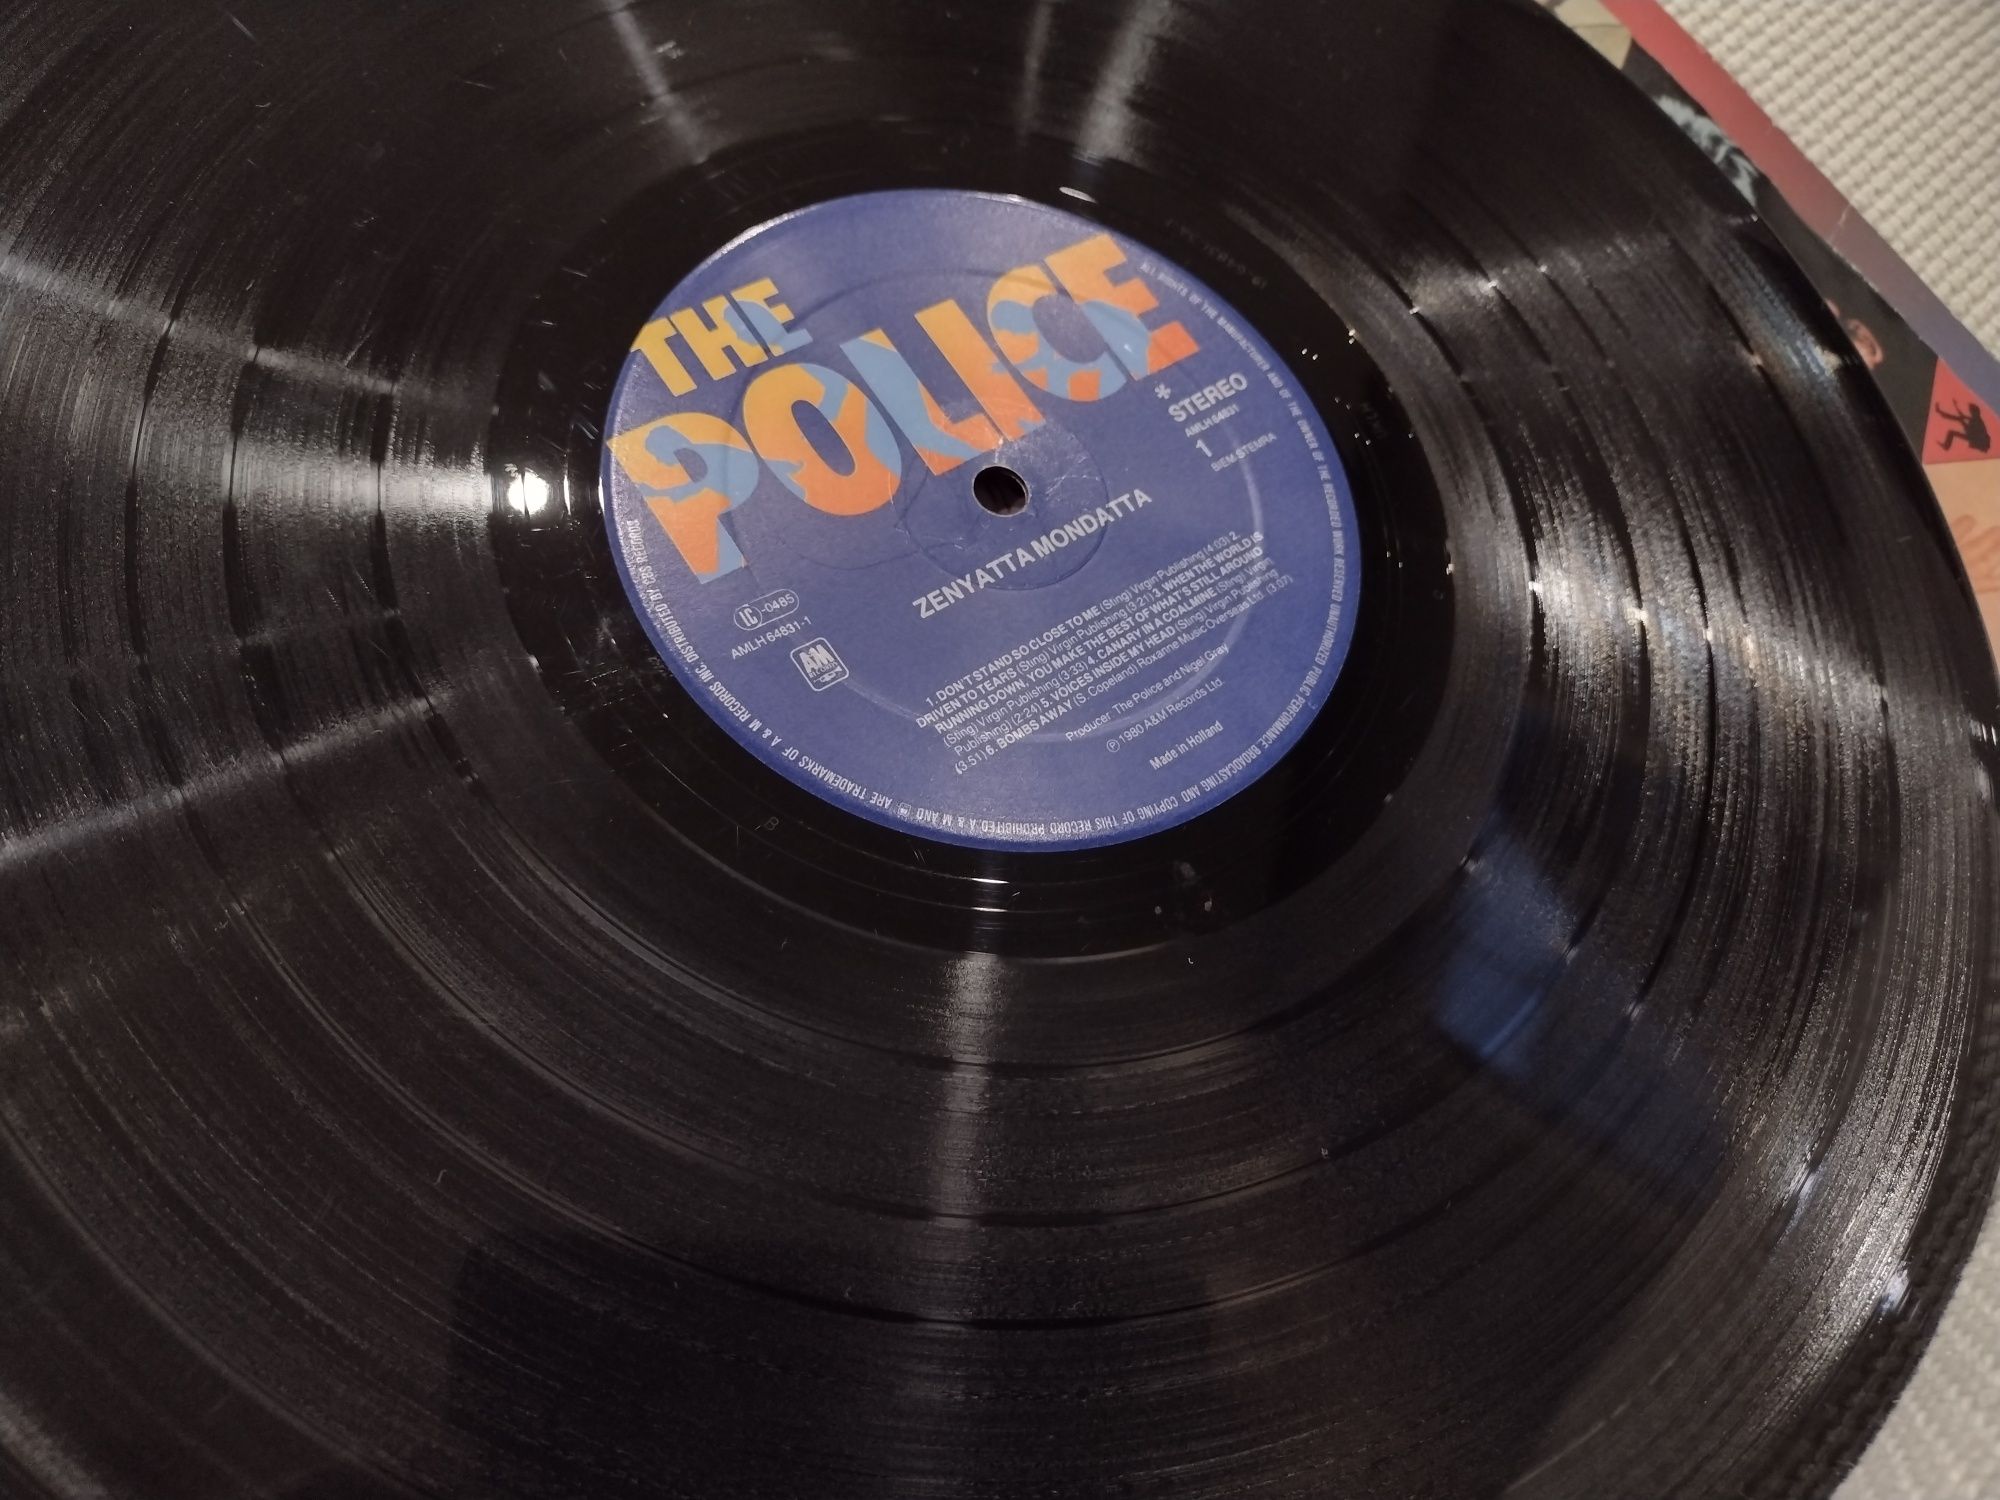 The Police long play